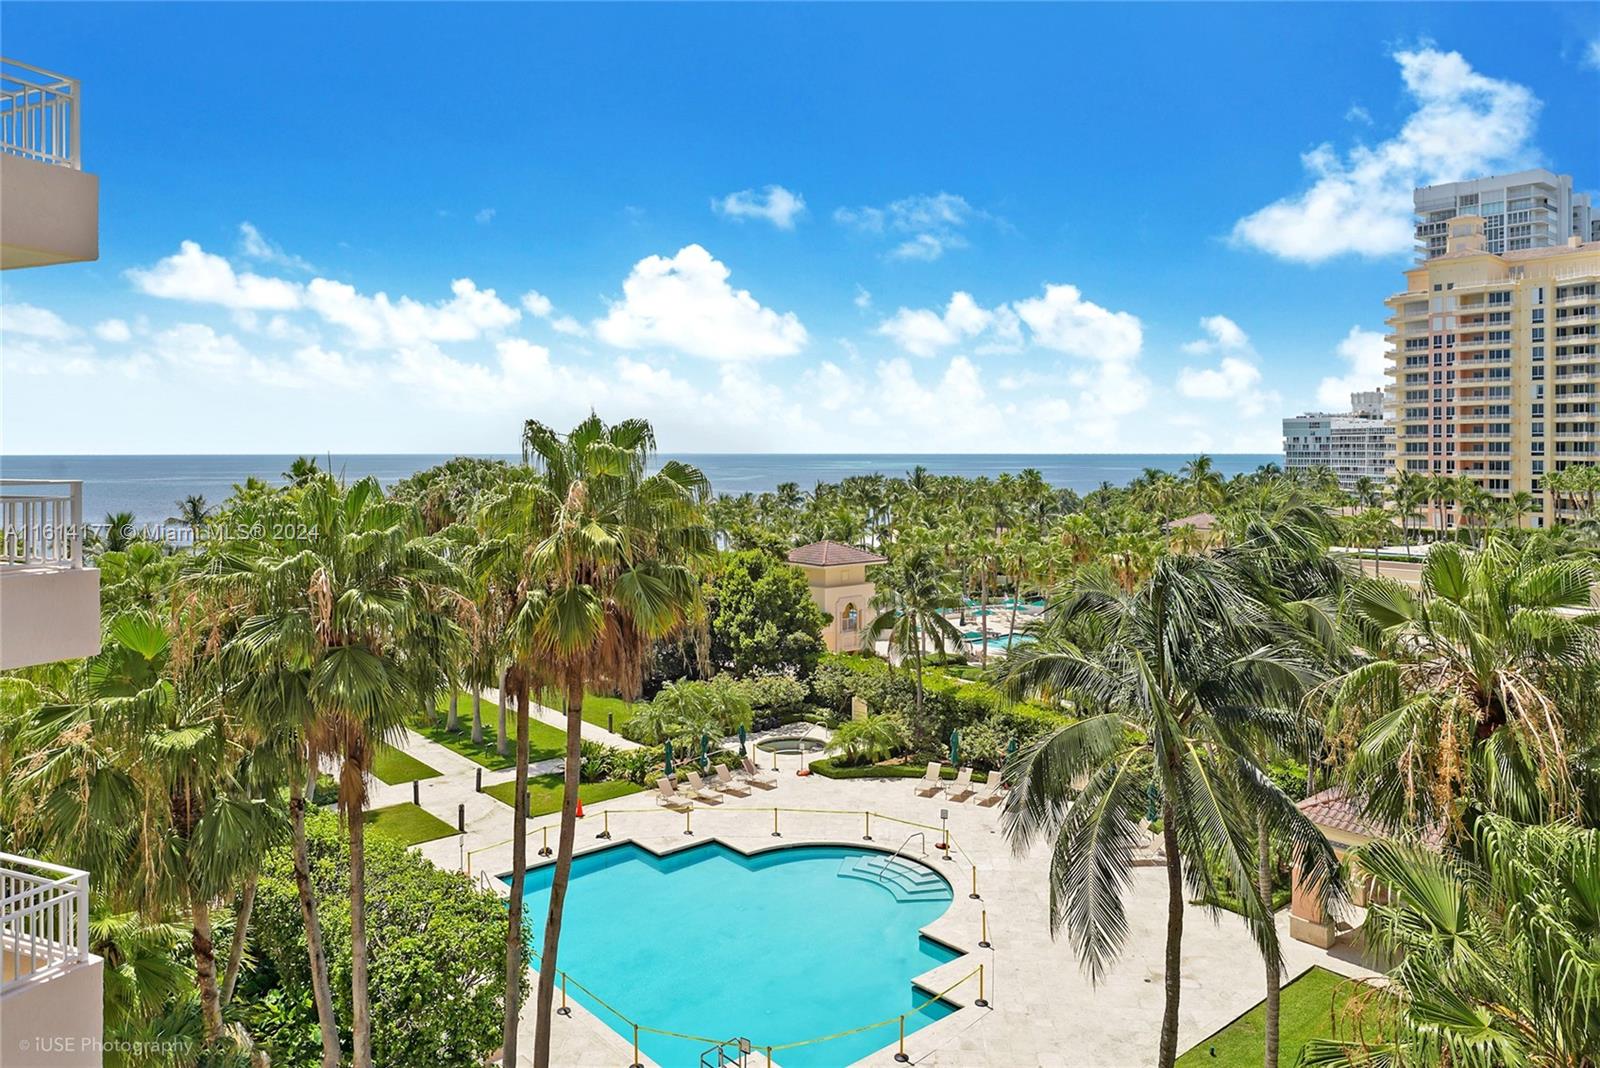 PRIME, SOUTHEAST EXPOSURE offer views of the blue, Atlantic Ocean, pool & lush, tropical gardens!    This spacious 3 bedroom, 3 bath, Floor thru design floor plan has two large terraces!     The Northwest terrace offers views of the ocean, beach, bay & a peek of the city lights!     The Ocean Club Key Biscayne is a luxurious private community with world class amenities and services such as direct beach access, towel, chair & umbrella service, several pools (beachfront, lap and building), gyms, spa with sauna, steam and whirlpool, 8 hard-tru lighted tennis courts, spa, beauty center, BEACH BAR & GRILL and Fresco restaurants, valet parking, concierge front desk & children's playground.  TWO ASSIGNED, COVERED PARKING SPACES, #521 & #605.